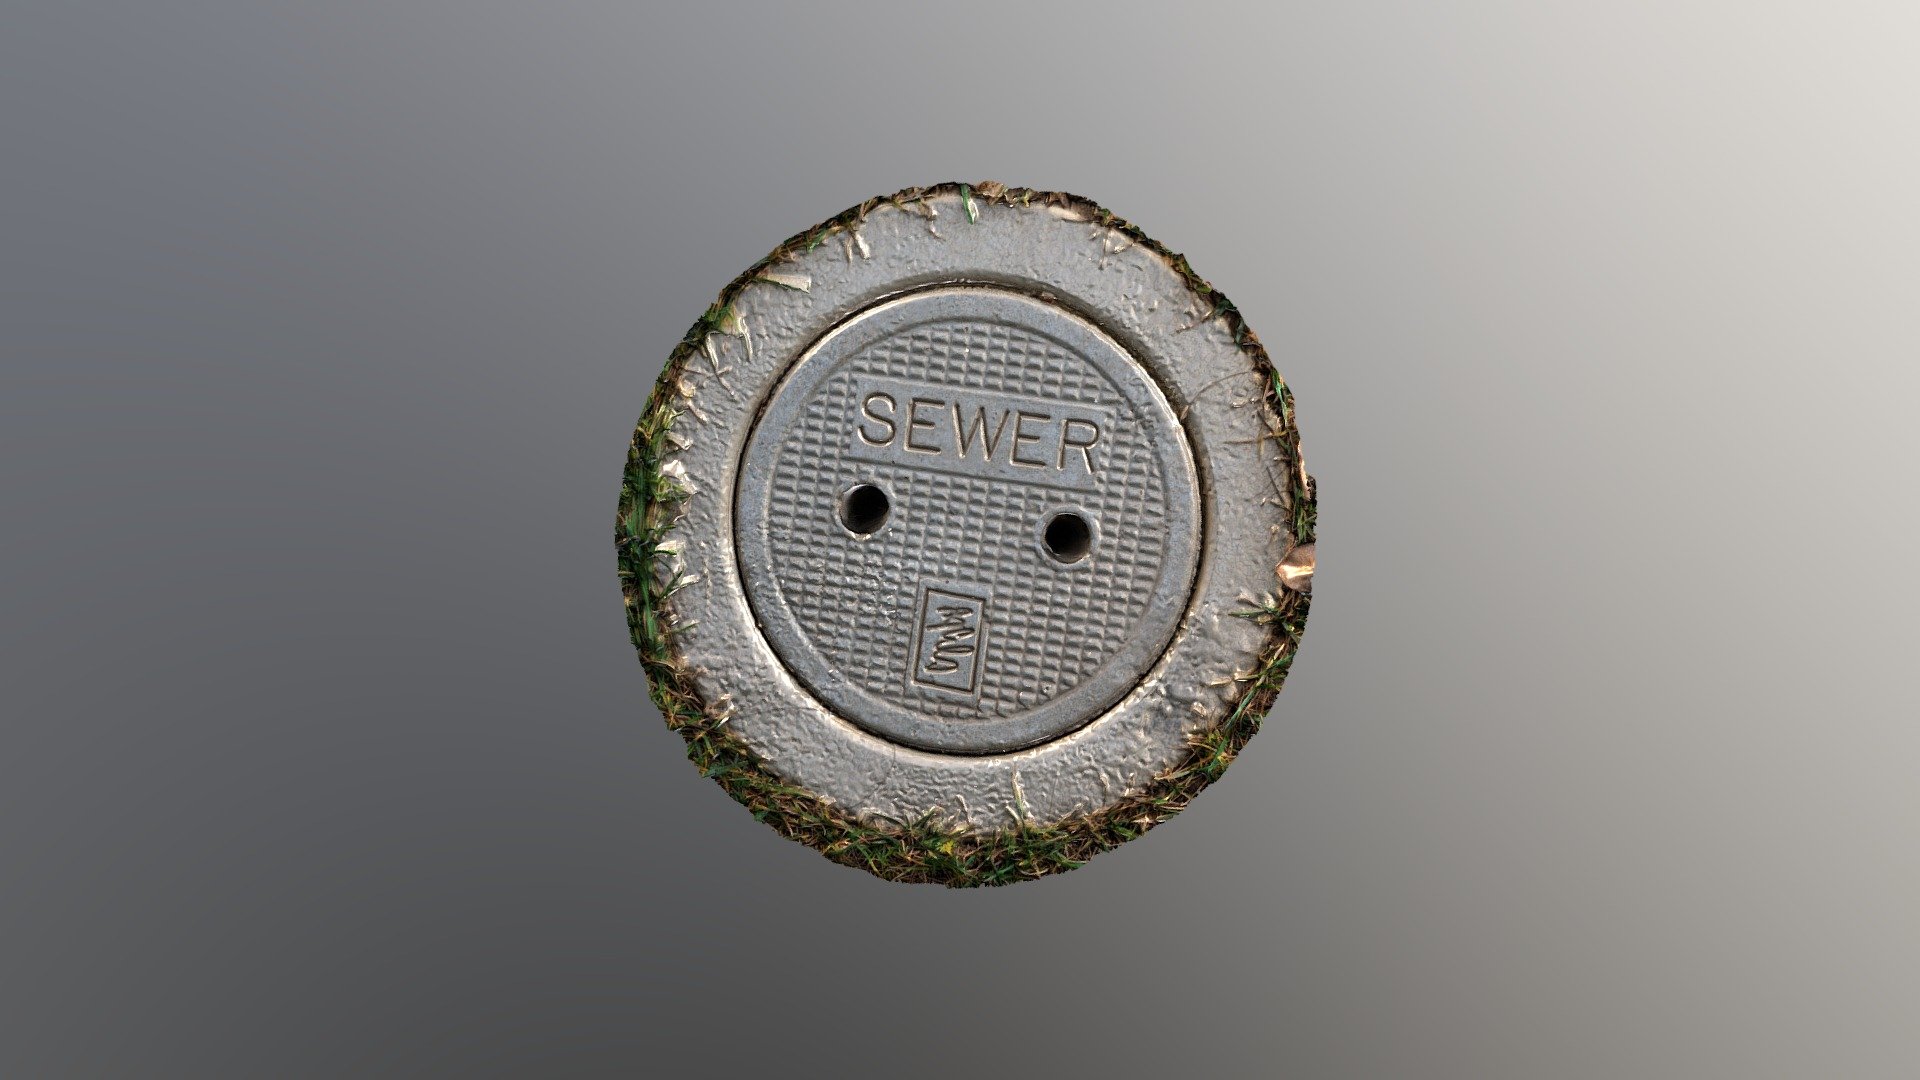 Sewer Cover